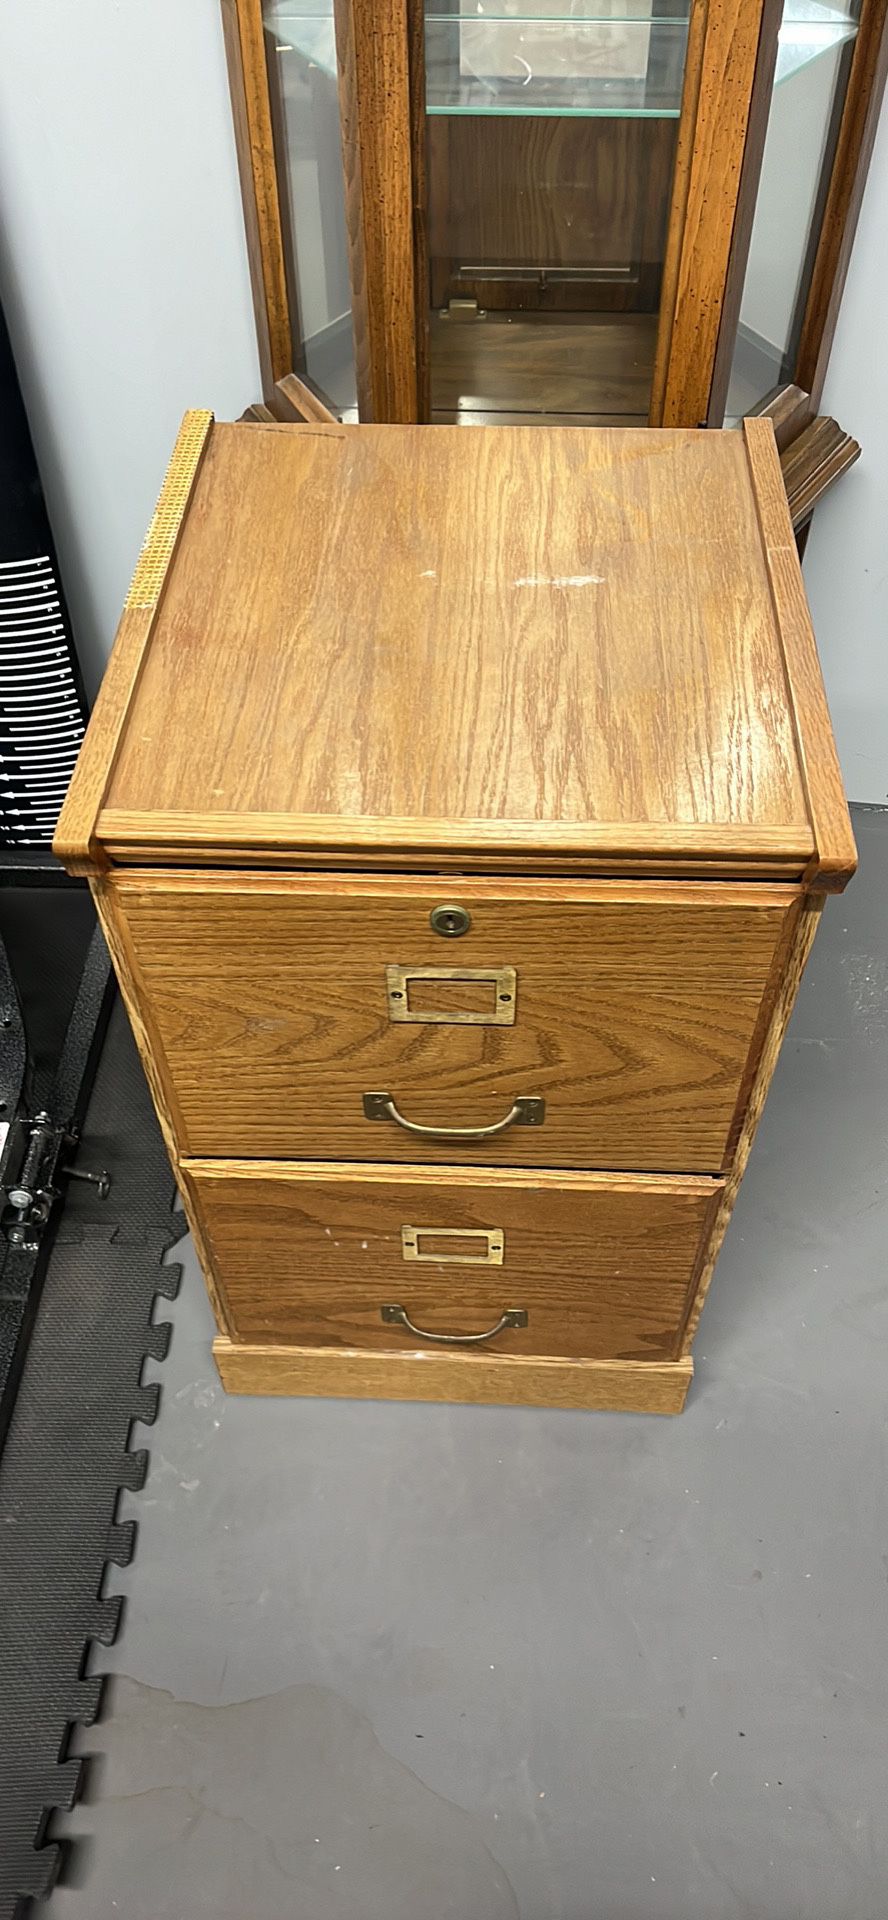 1 Wooden Filing Cabinet